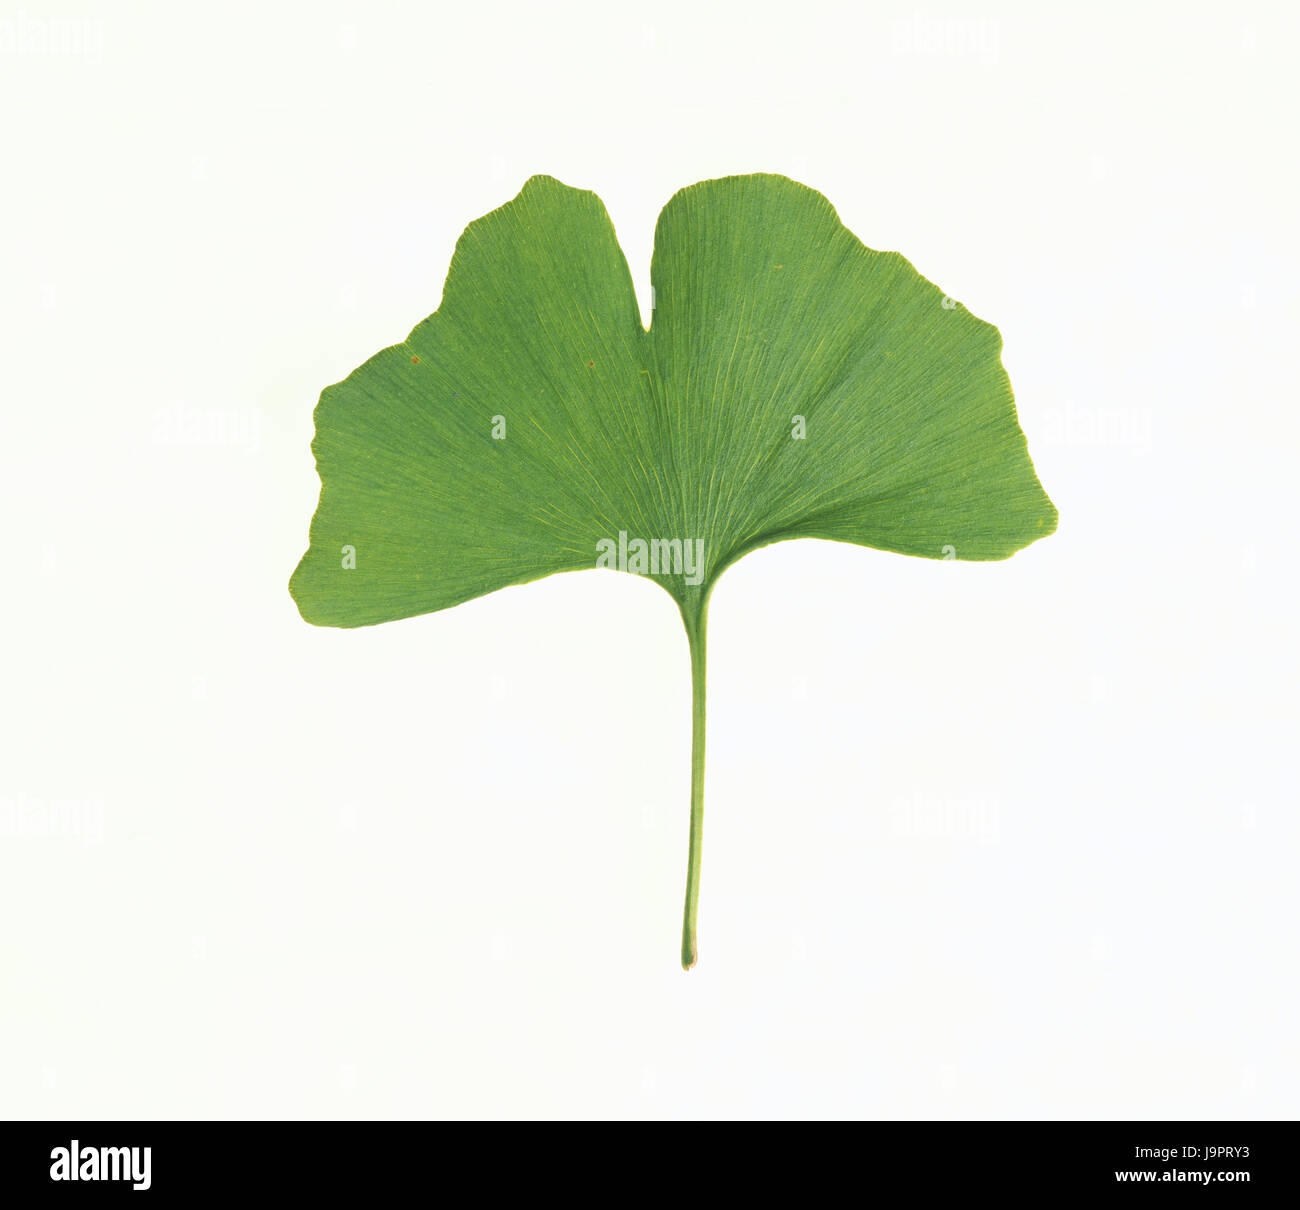 Ginkgo leaves,ginkgo biloba,plants,Asian,medicinal plants,ginkgo,medicament plant,nature drug,ginkgo leaves,leaves,green,professional-shaped,professional leaf tree,icon,fertility icon,longevity,yin yang,object photography,Frei's plate,studio, Stock Photo